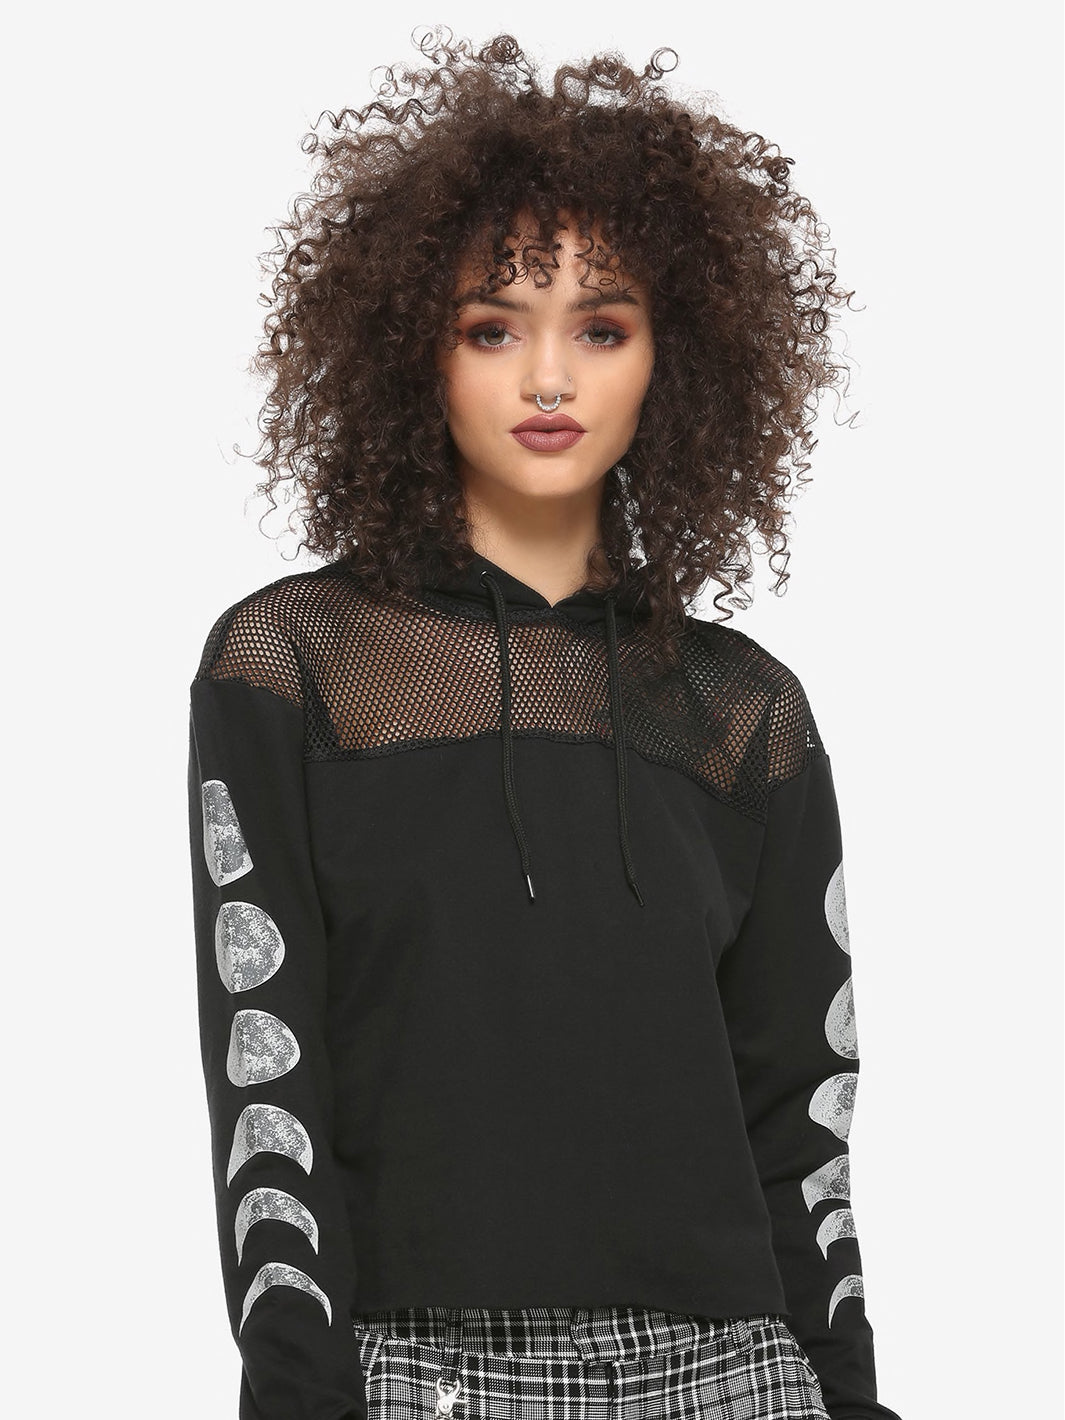 black hoodie with fishnet trim and moon phases on sleeves